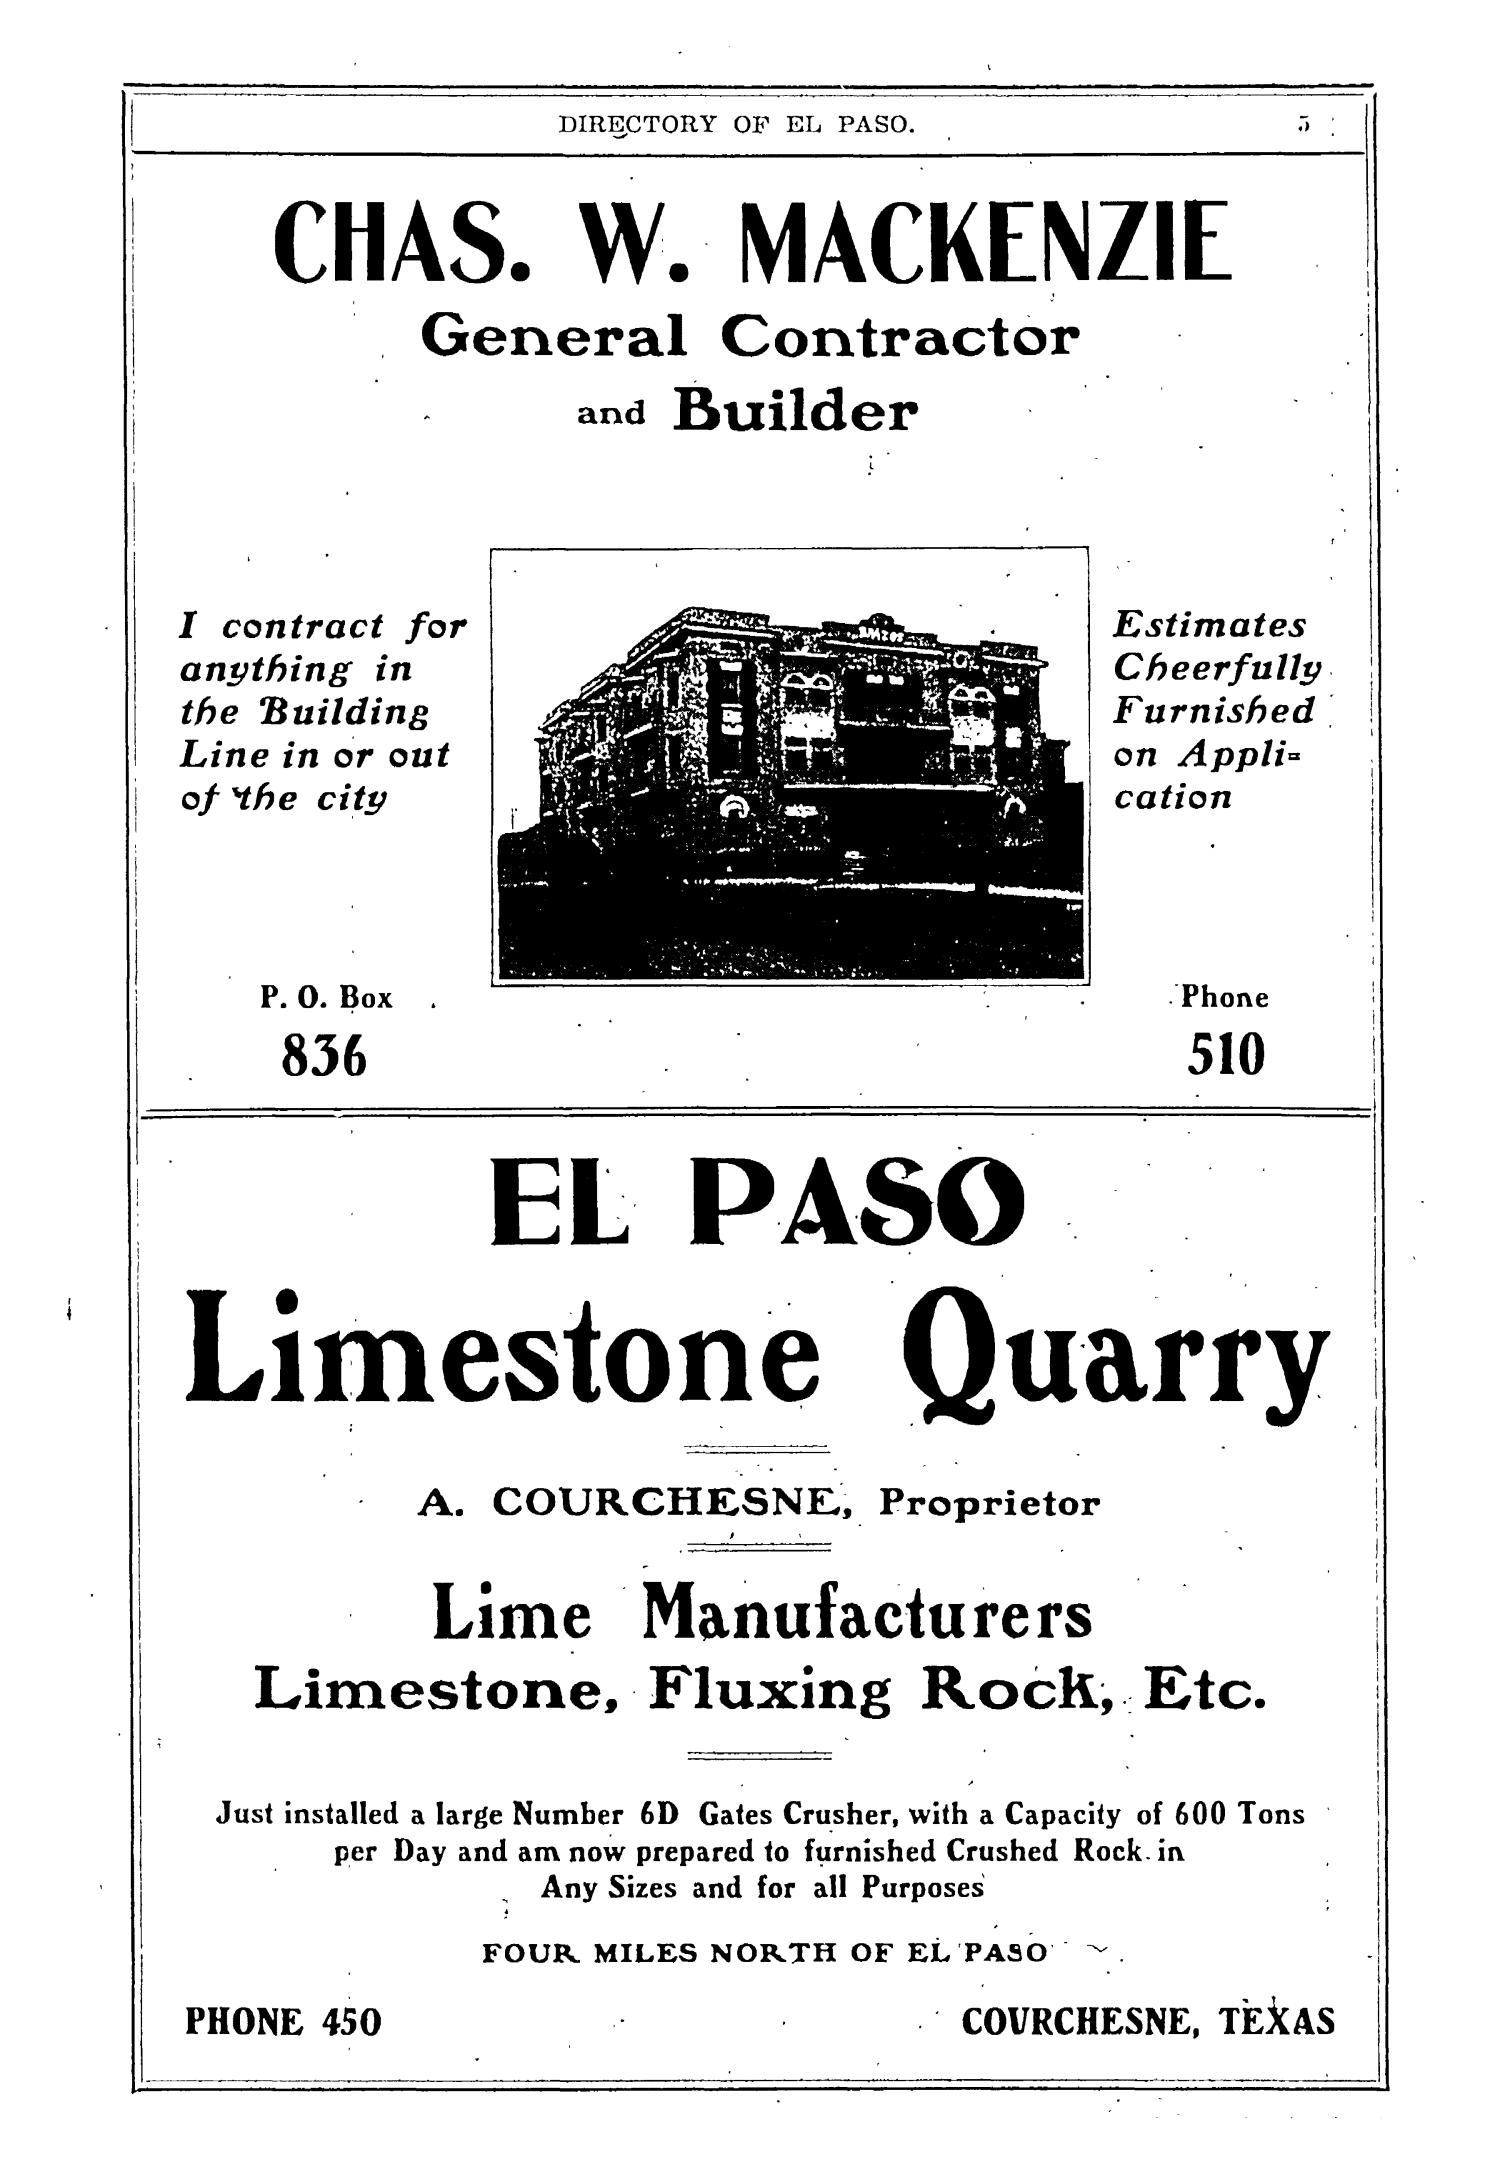 John F. Worley & Co.'s El Paso Directory for 1906
                                                
                                                    5
                                                